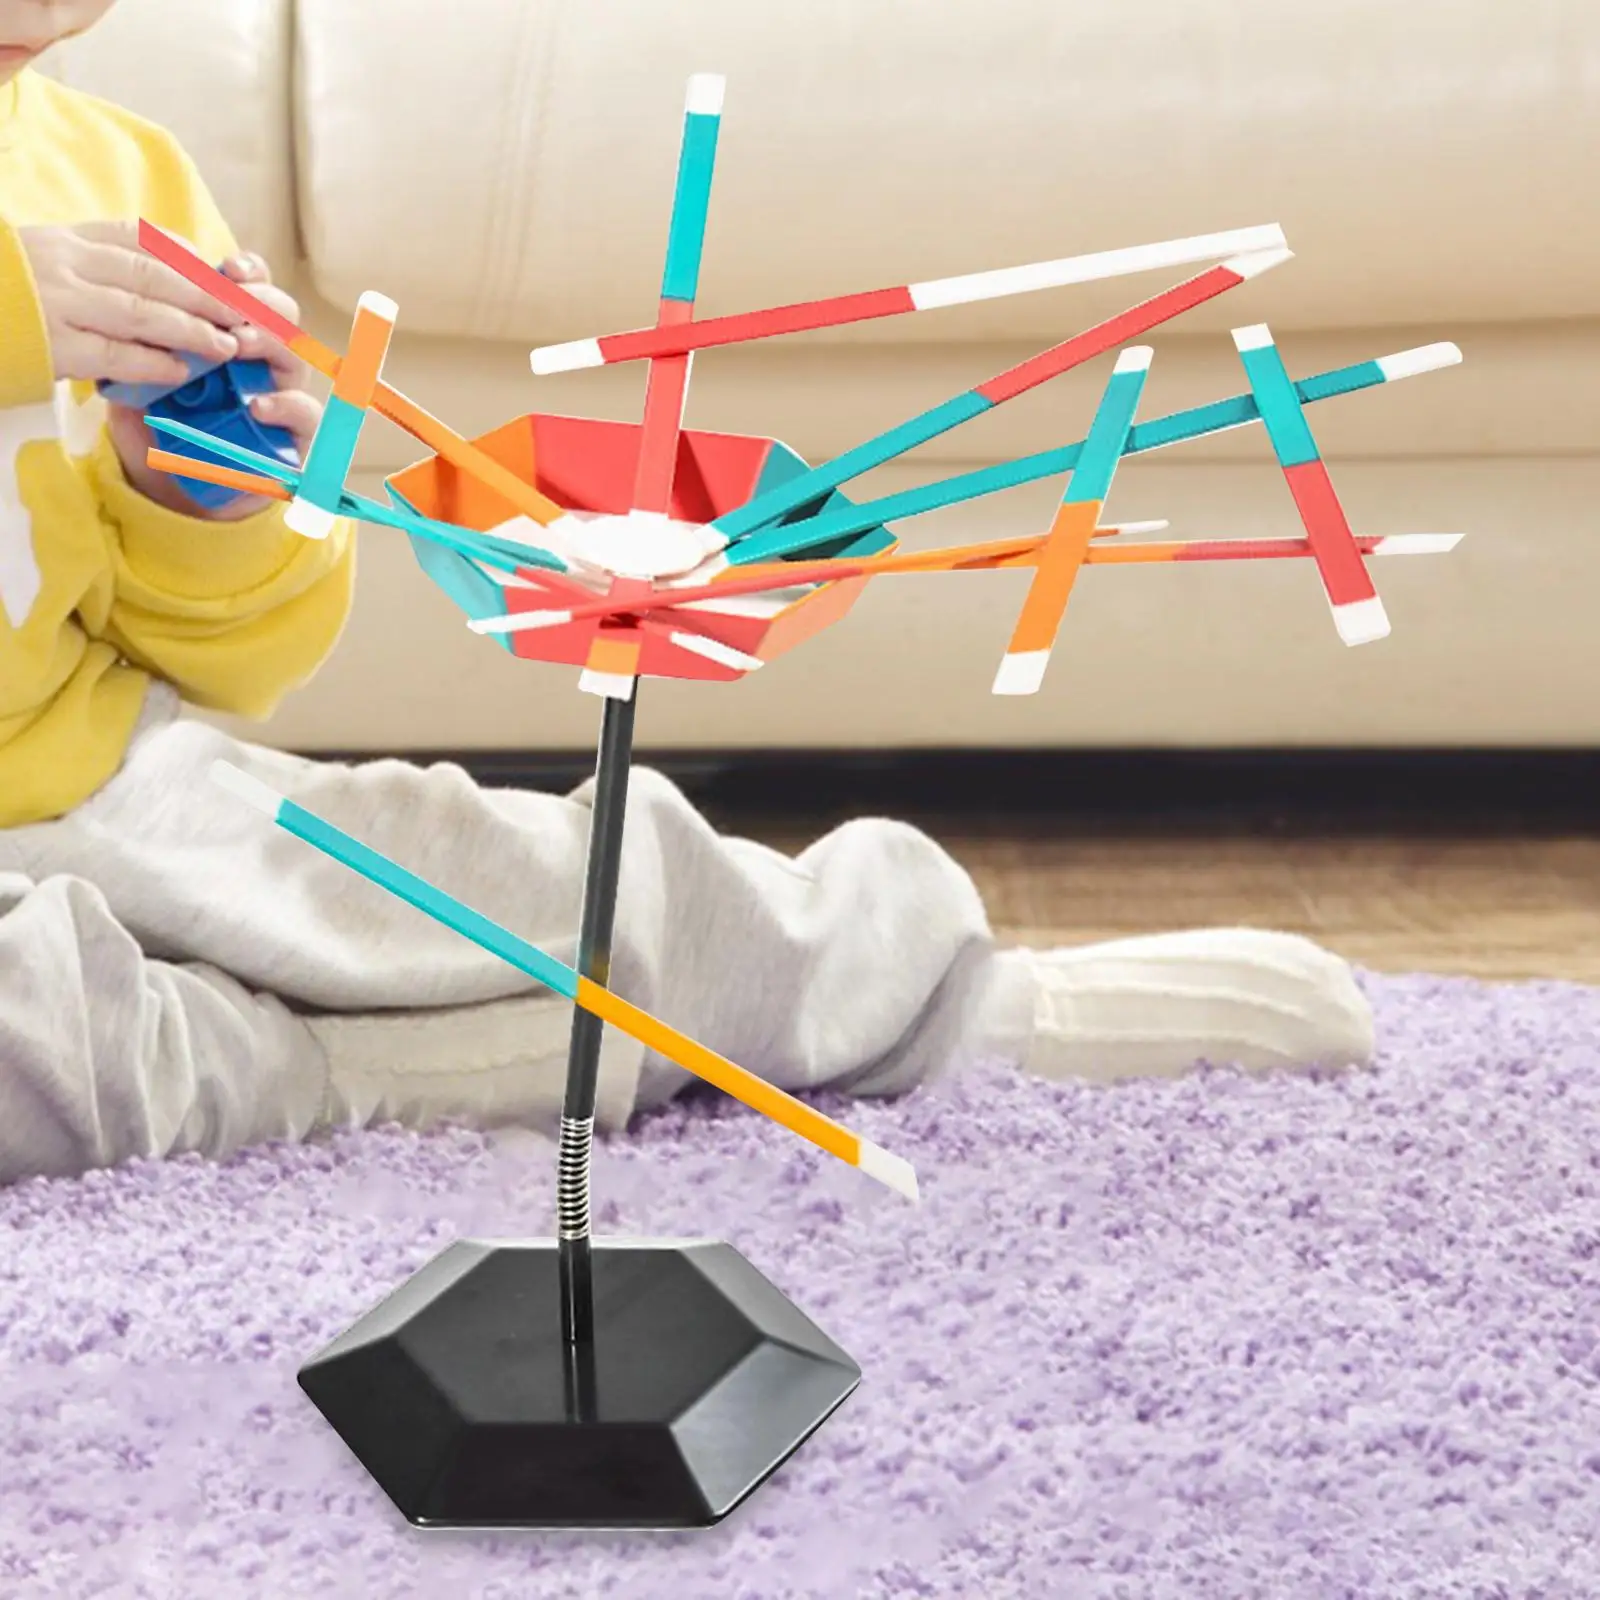 Sticks Stack Game Multiplayer Toys Portable Balancing Training for Family